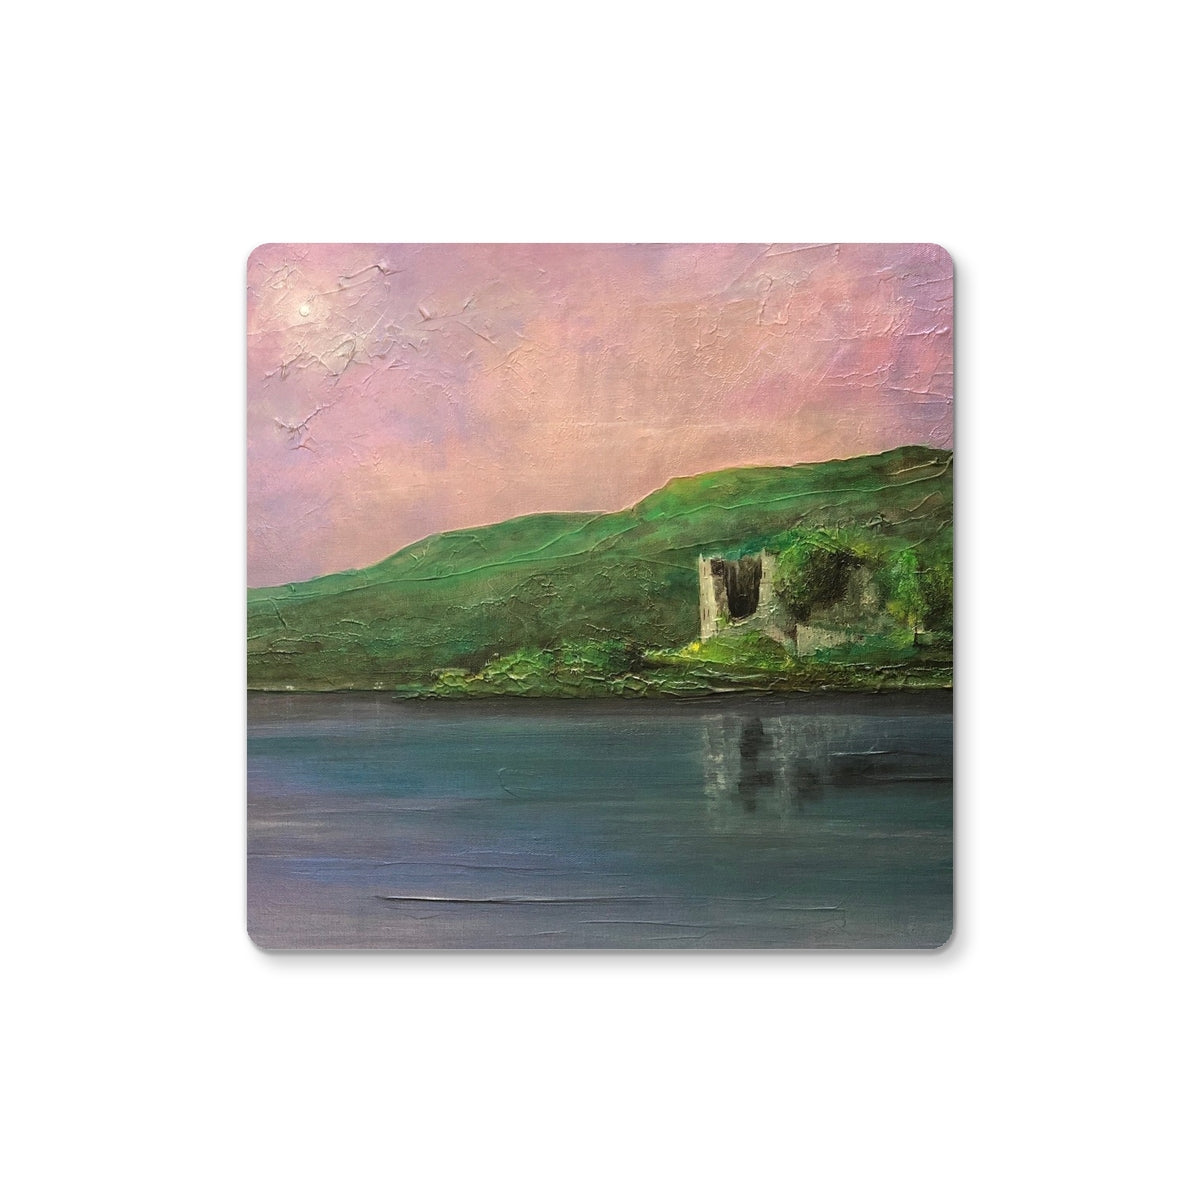 Old Castle Lachlan Art Gifts Coaster-Homeware-Prodigi-4 Coasters-Paintings, Prints, Homeware, Art Gifts From Scotland By Scottish Artist Kevin Hunter